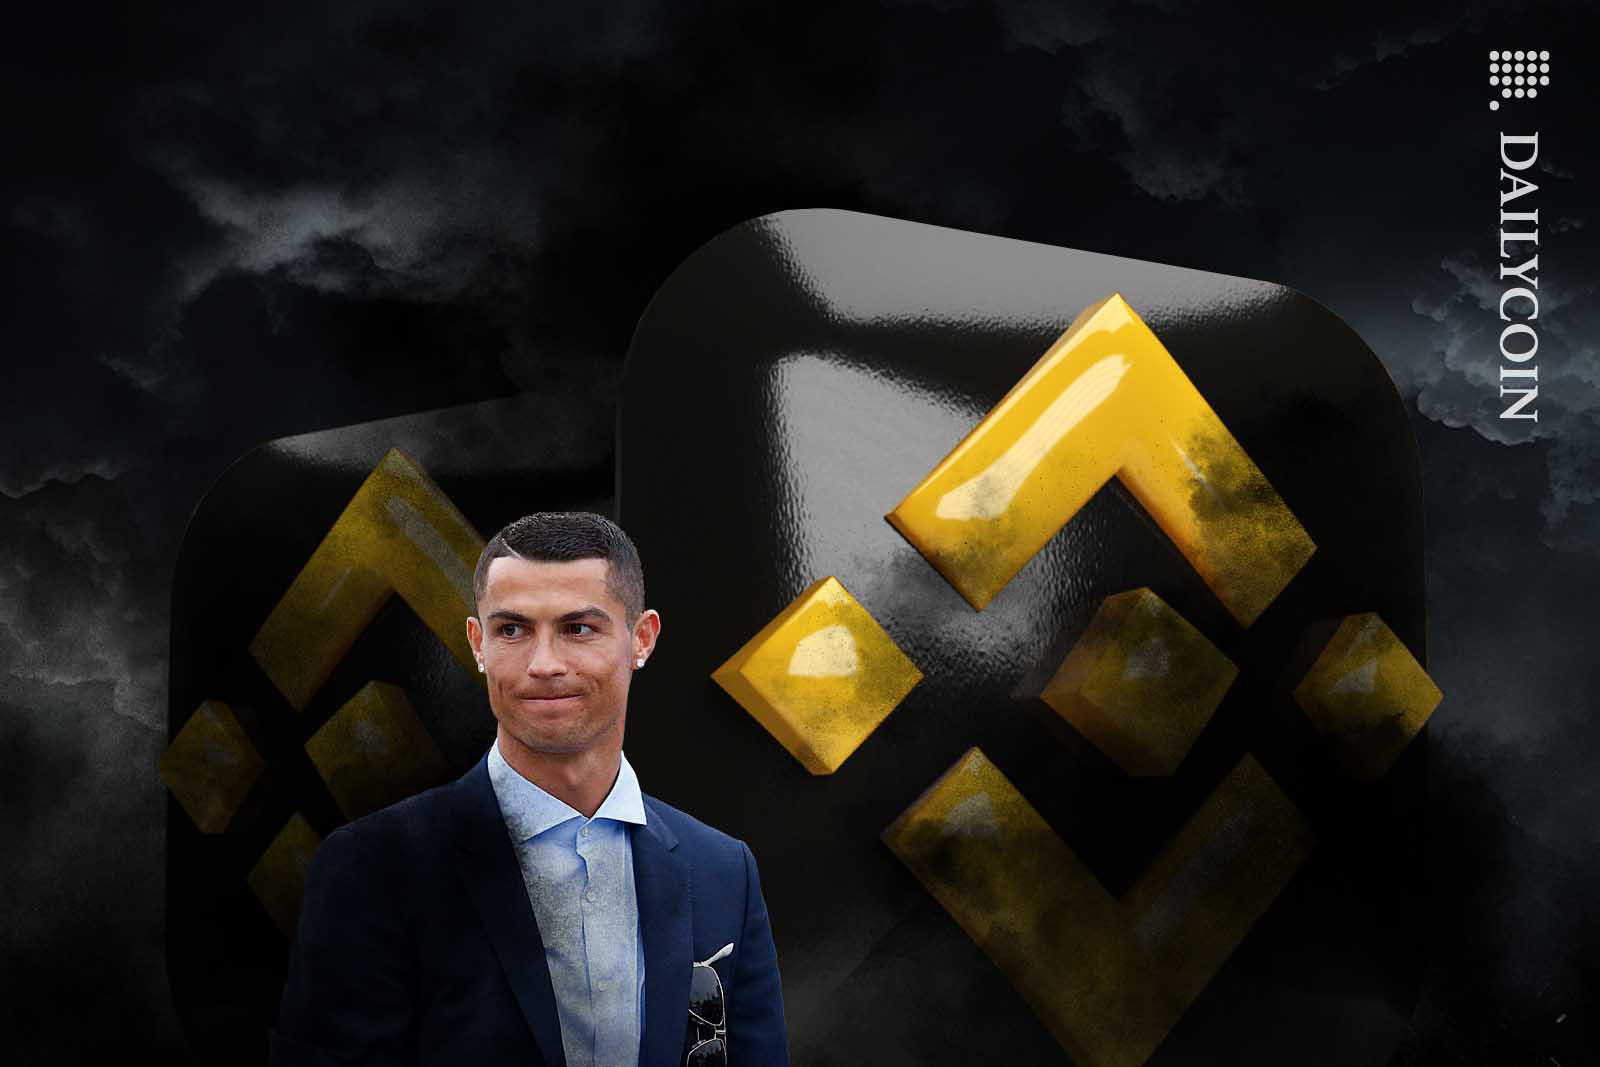 Christiano Ronaldo looking disappointed under a dark and cloudy sky and Binance logos in the background.